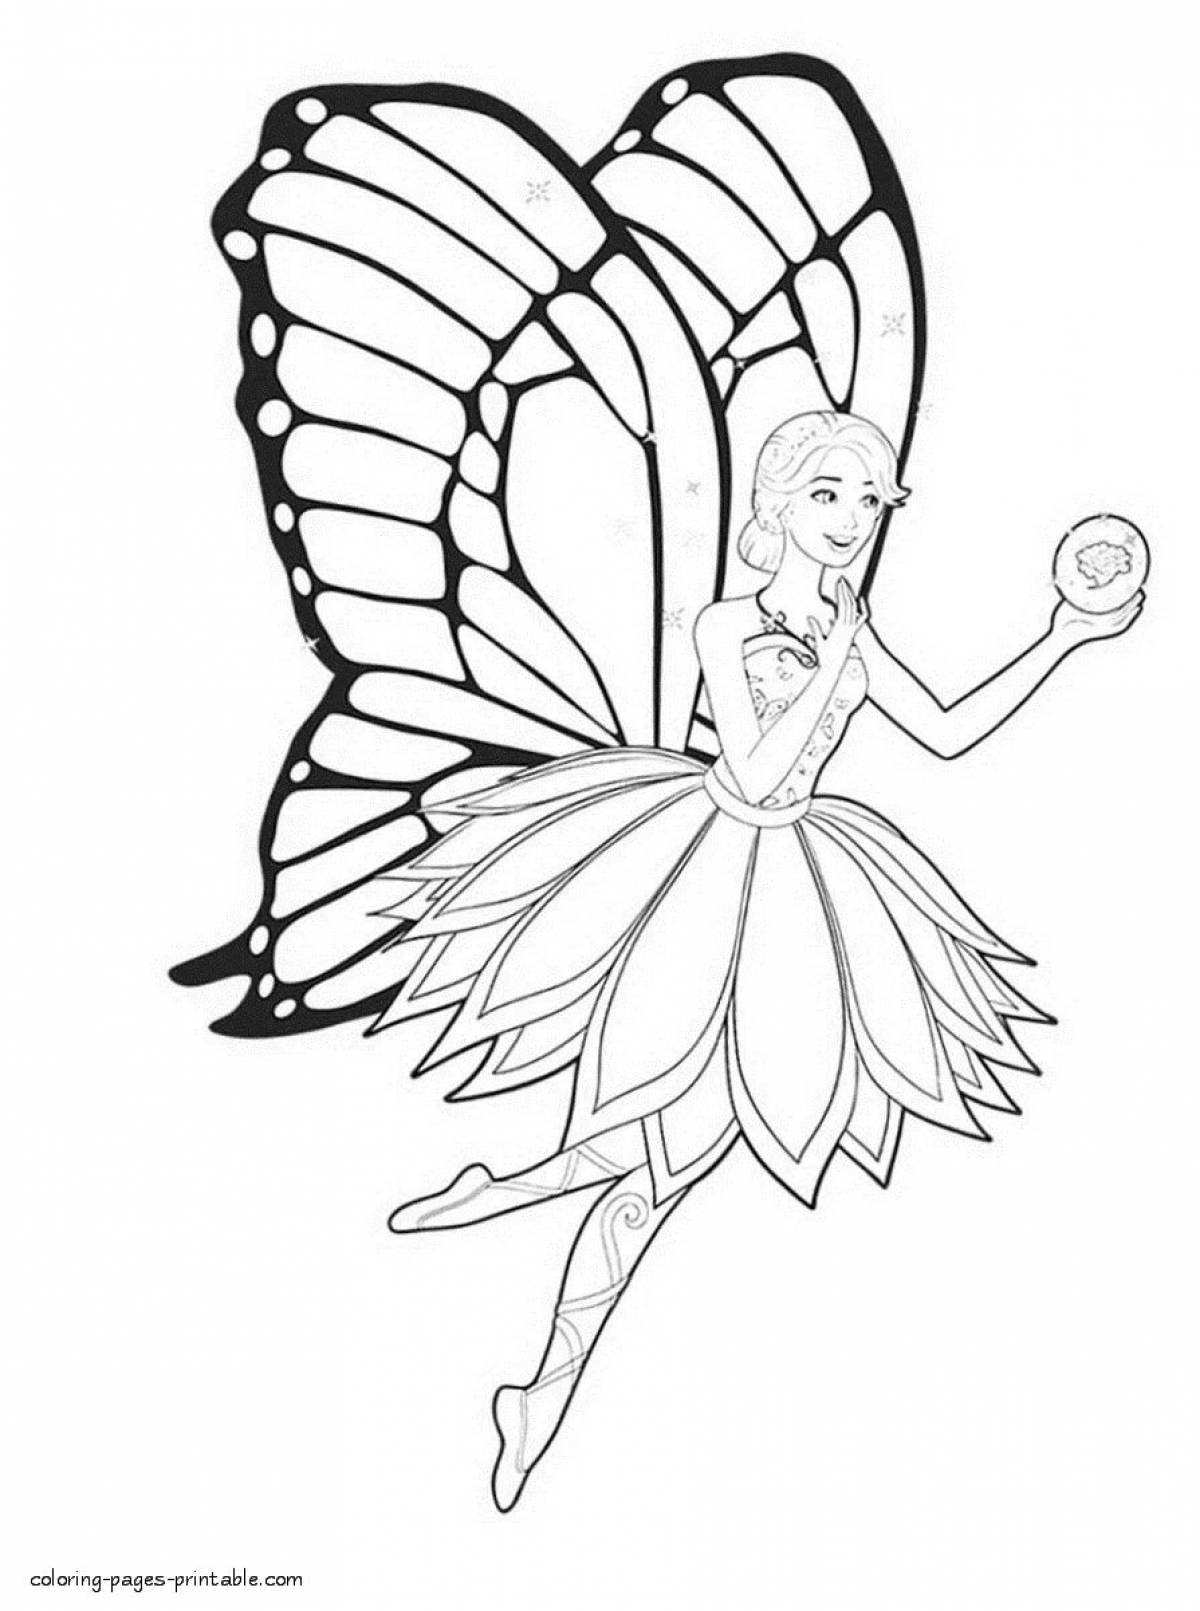 Excellent coloring princess butterfly